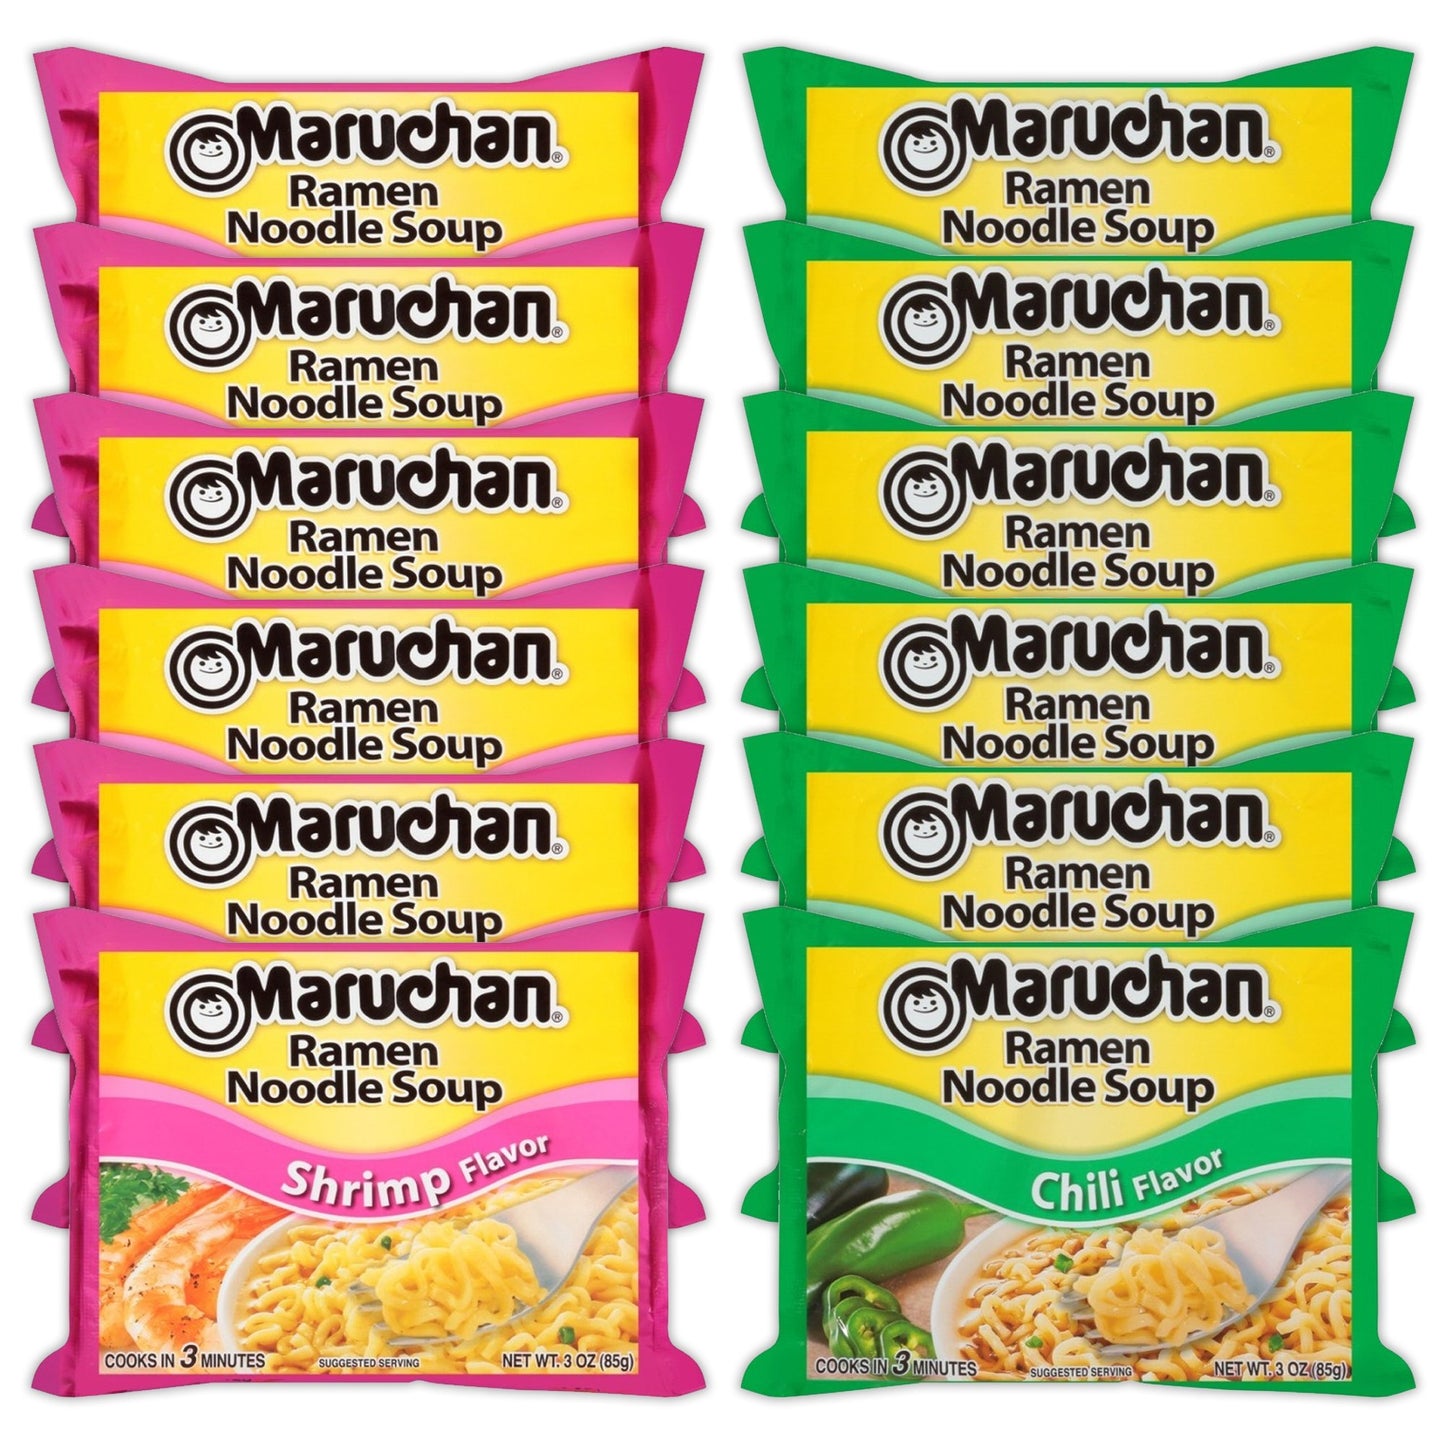 Maruchan Ramen Instant Noodle Soup Variety, 2 Flavors - 6 Packs Chili & 6 Packs Shrimp , 3 Ounce Single Servings Lunch / Dinner Variety